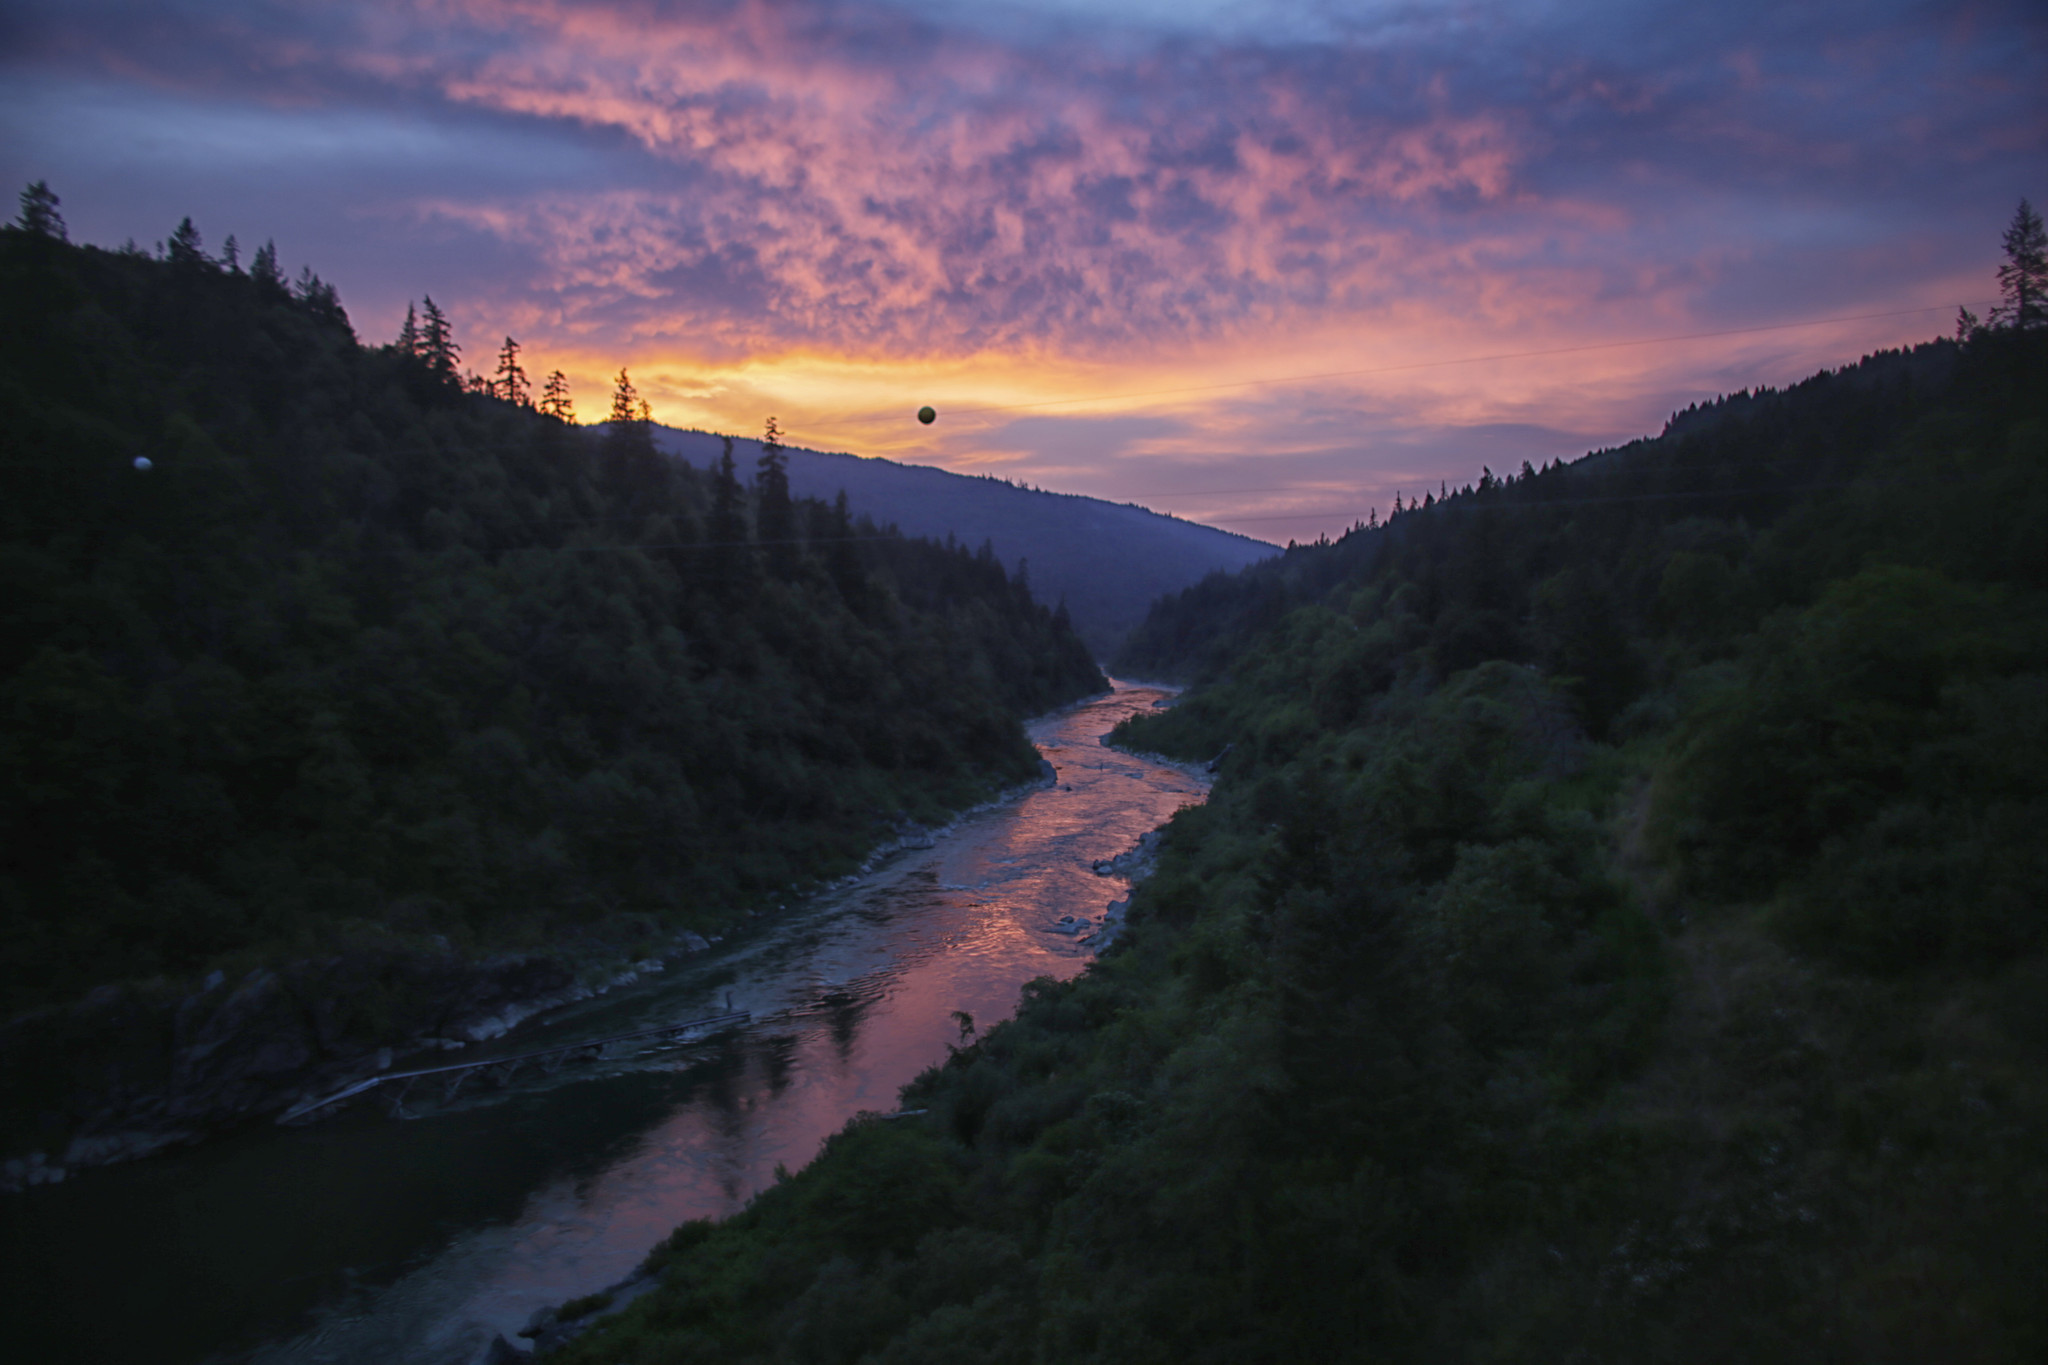 As the mighty Klamath River grew sick, poverty, addiction and lawlessness gripped the reservation.